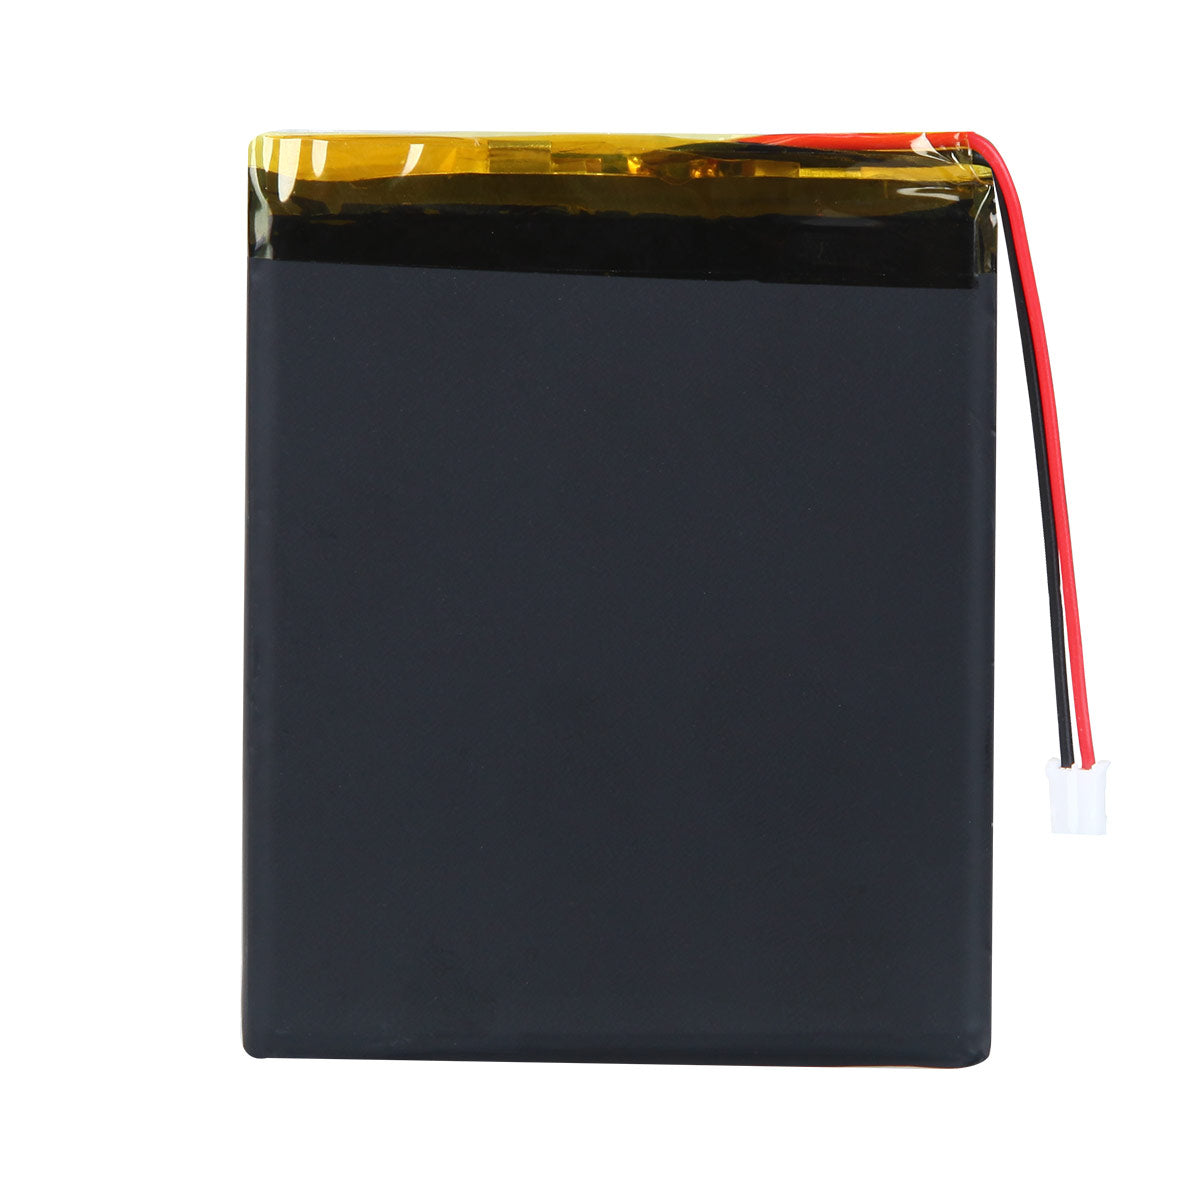 YDL 3.7V 2800mAh 506277 Rechargeable Lithium Polymer Battery Length 79mm